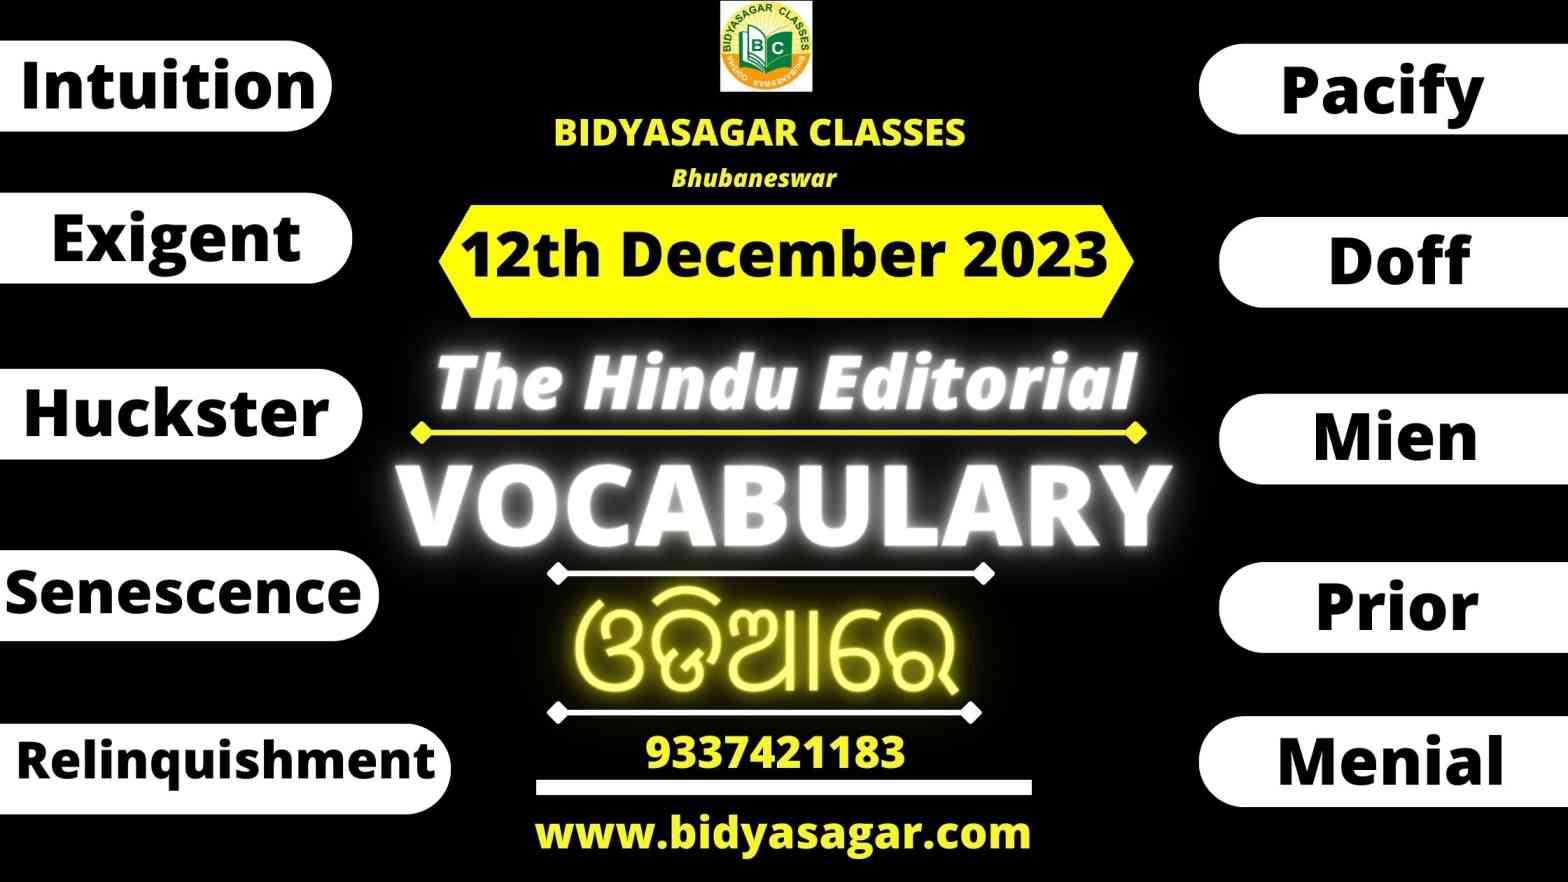 The Hindu Editorial Vocabulary of 12th December 2023